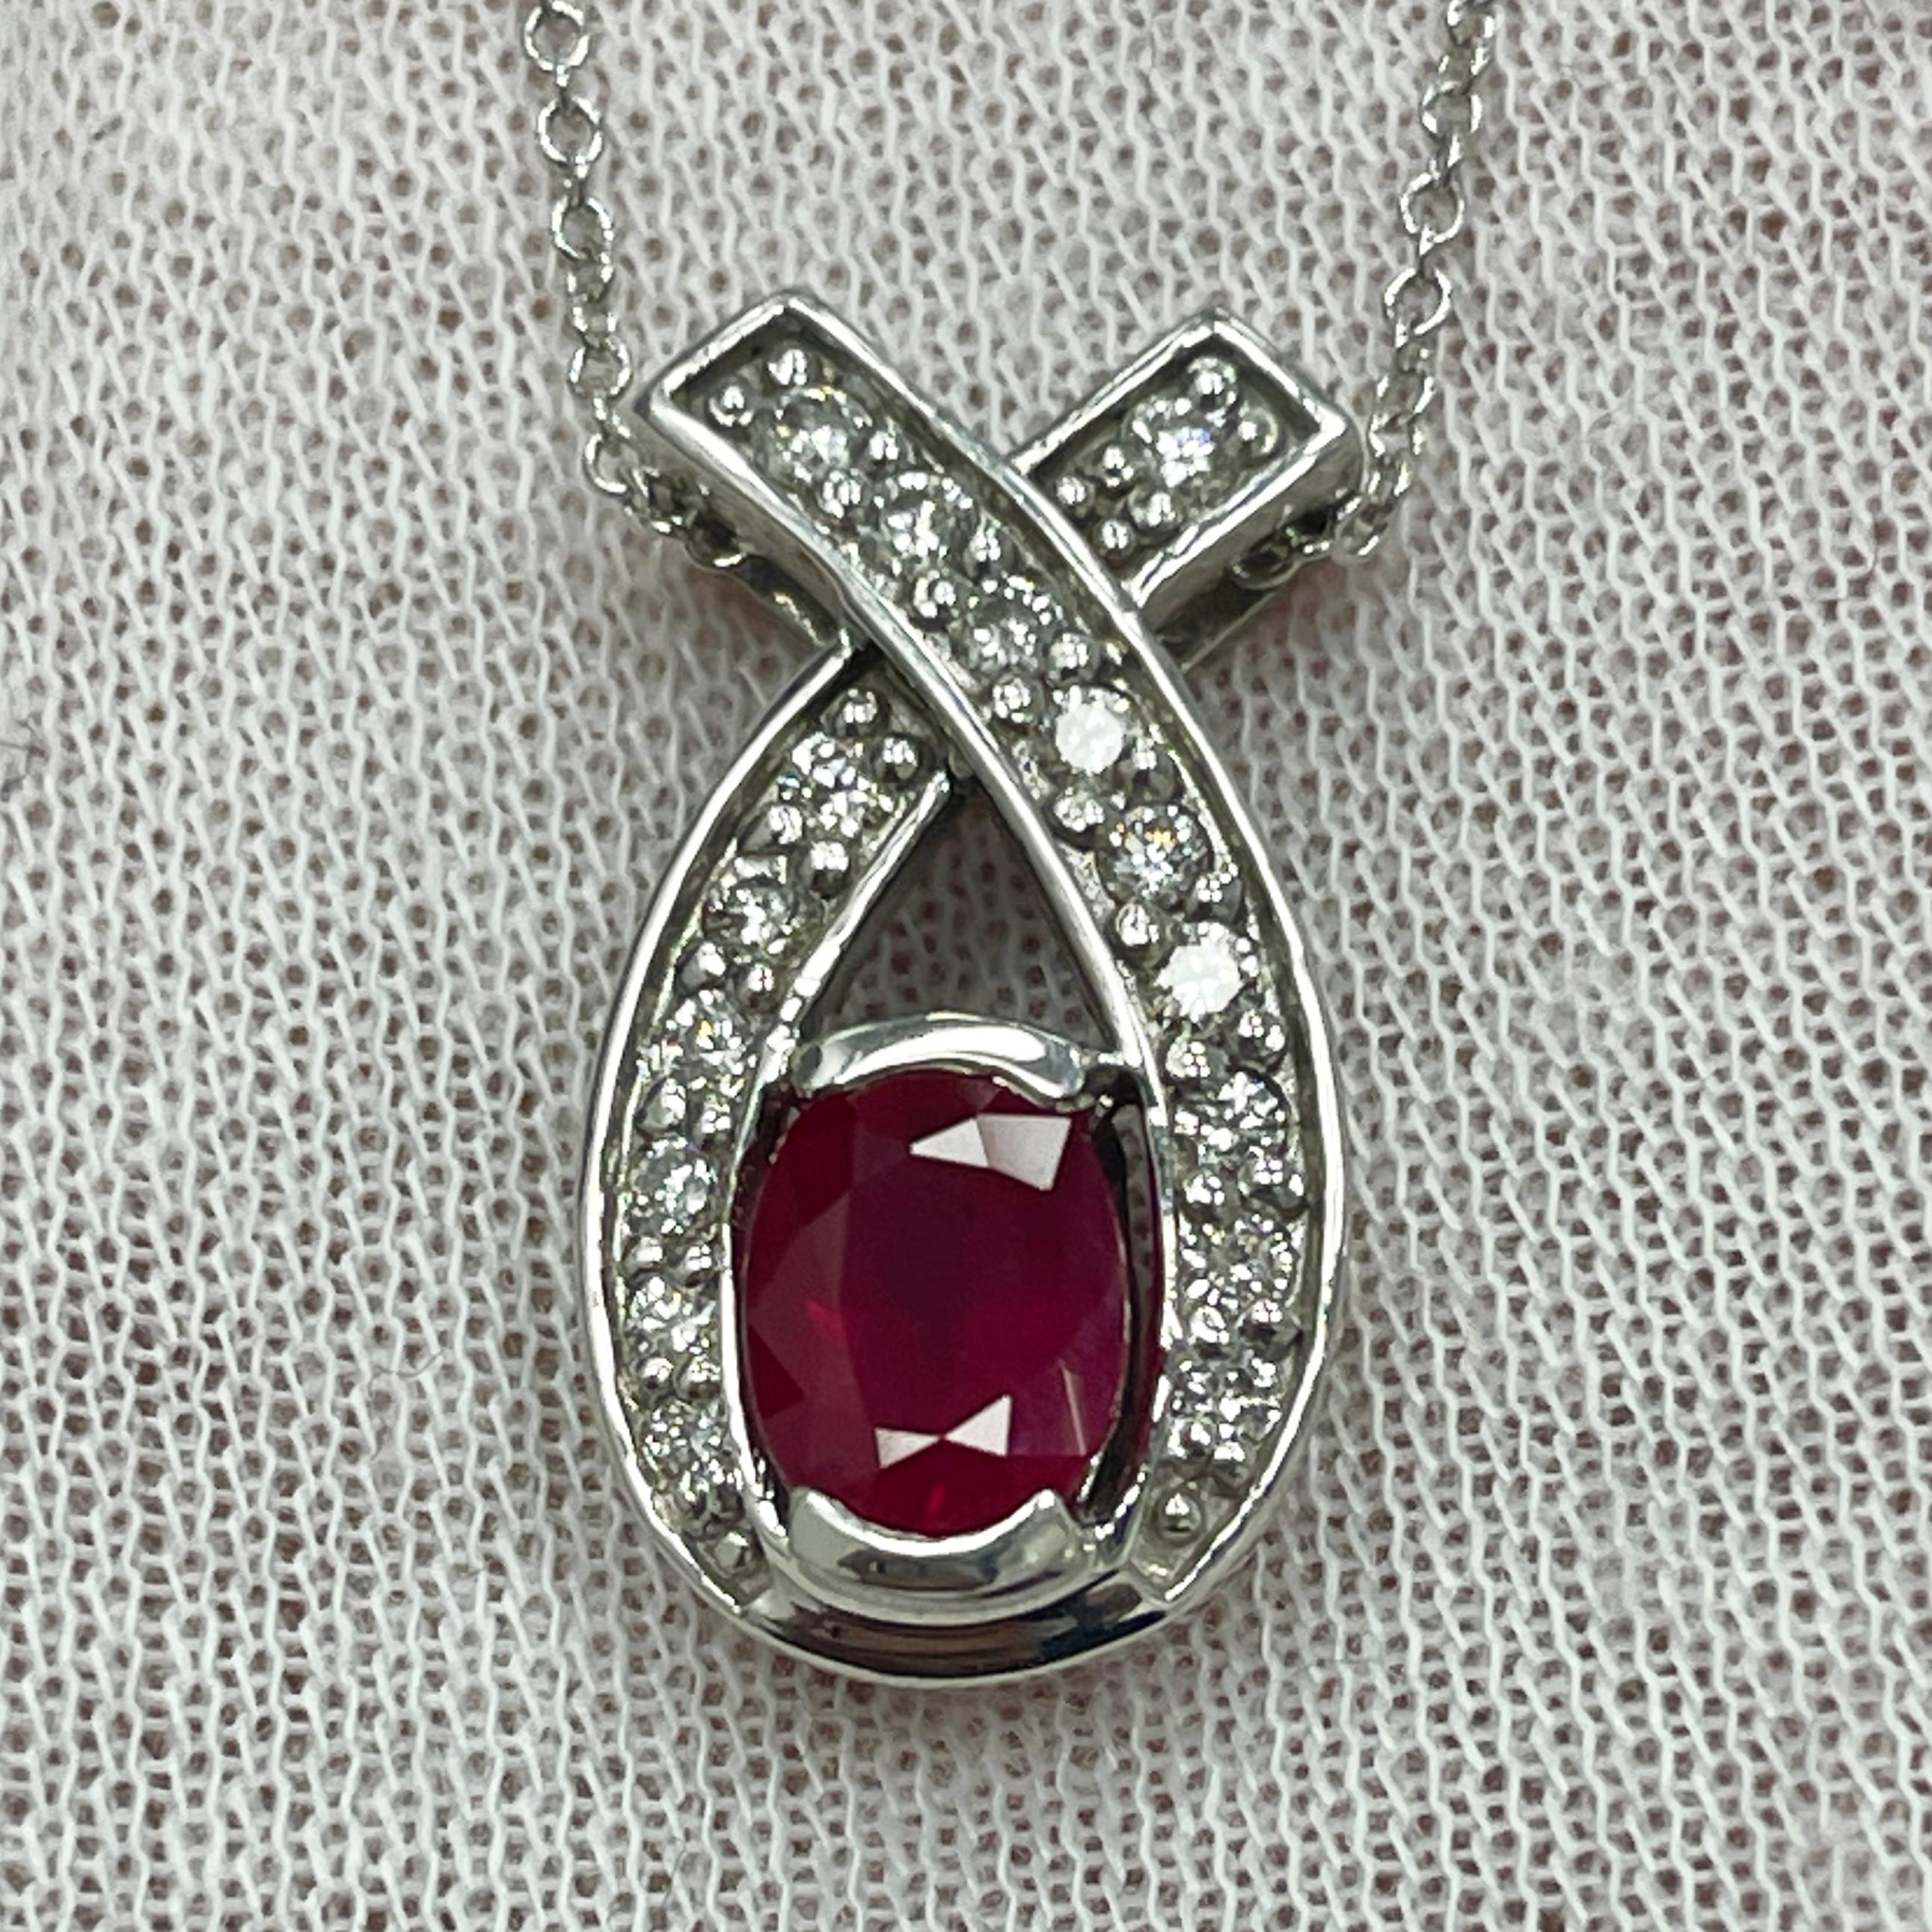 A saturated 1.08Ct ruby in a diamond (0.26Ct) 14K white gold pendant